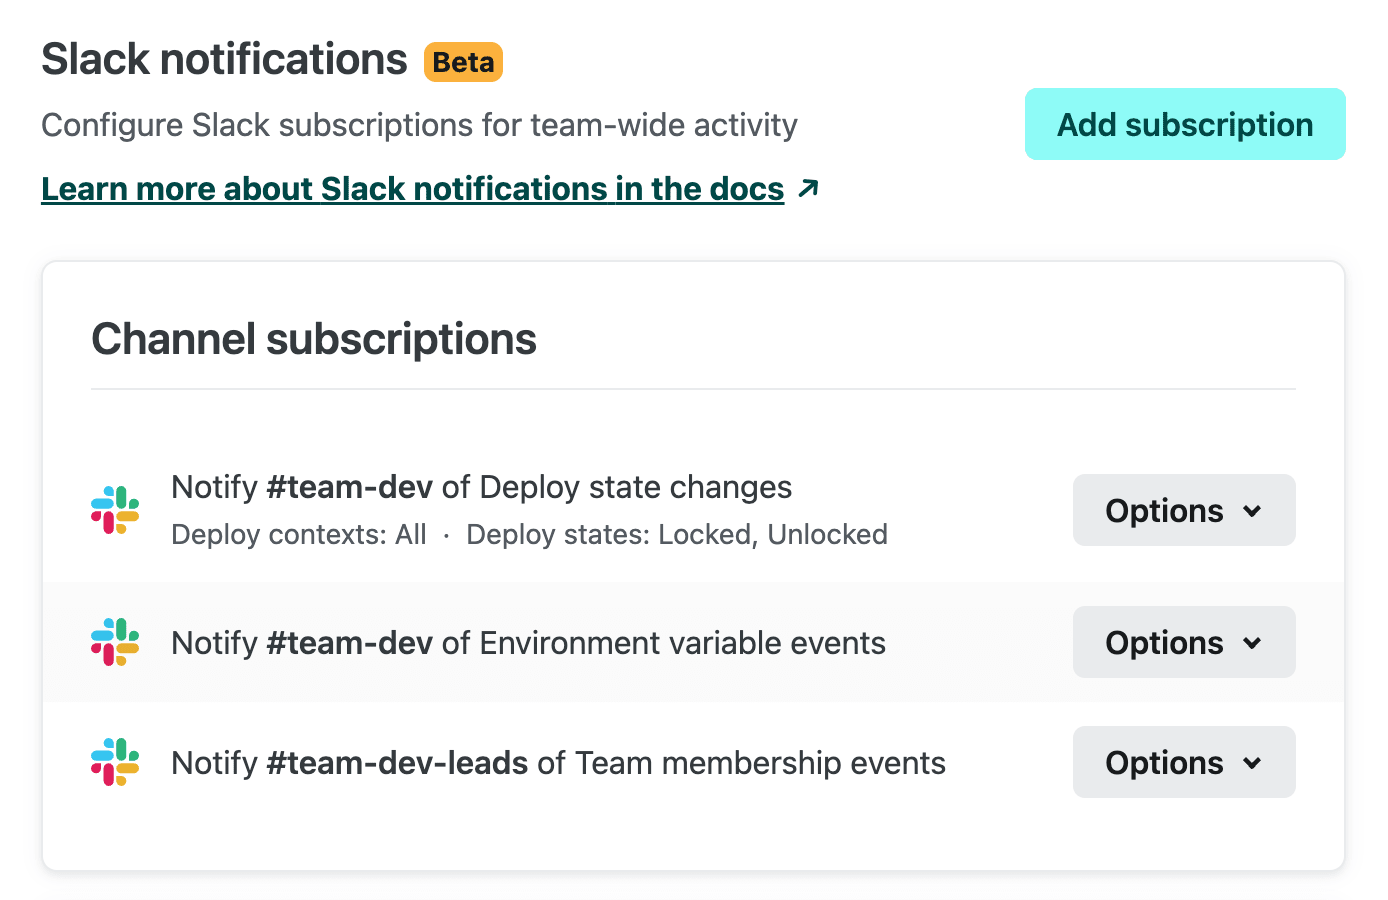 Team dev channel is subscribed to environment variables and deploys for all sites on the team. Team dev leads channel is subscribed to team membership events